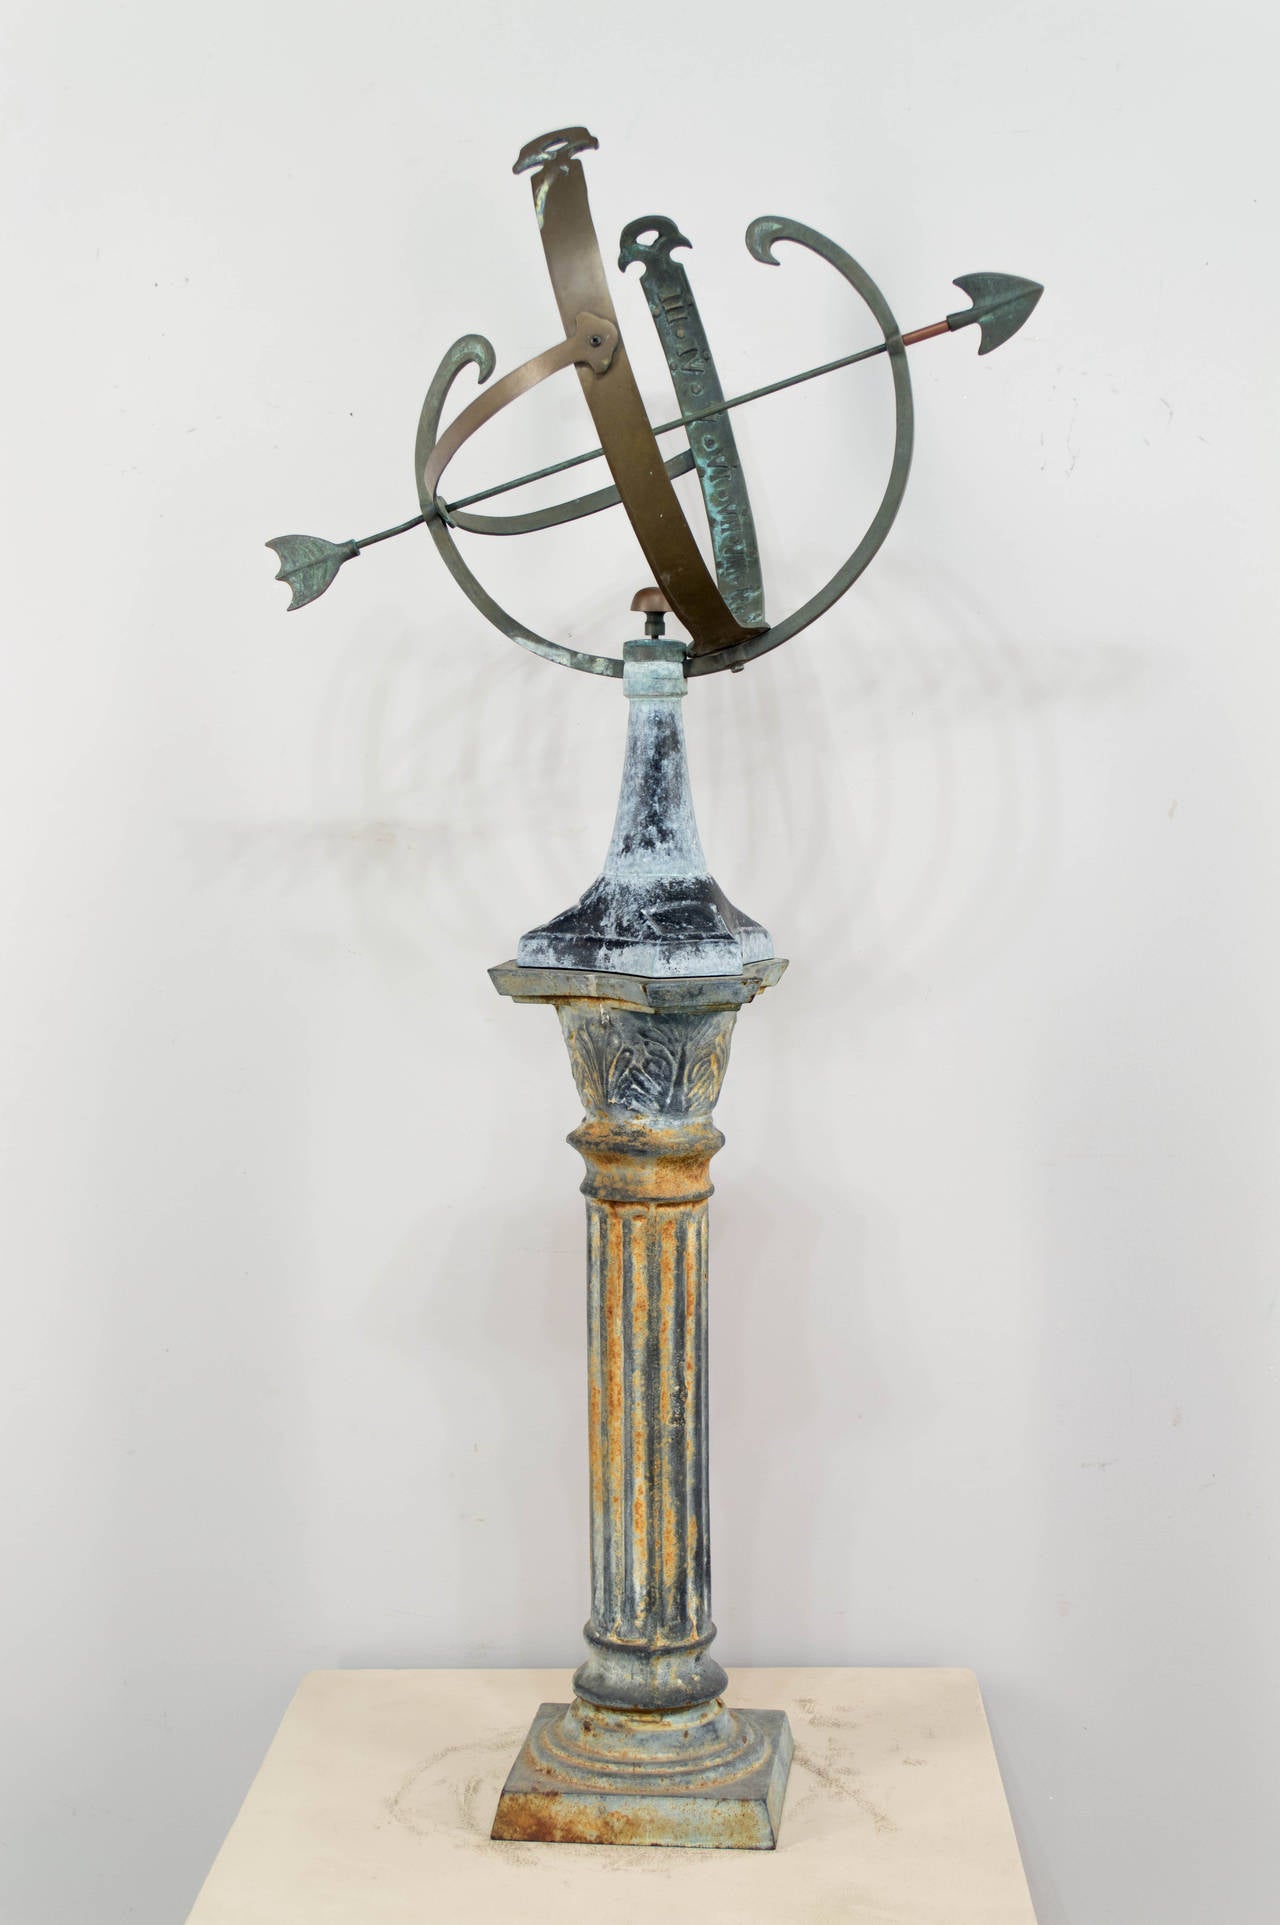 American armillary or sun dial made of copper with a cast iron base. Nice old weathered patina with some rusting on column form pedestal. Copper has a verdigris patina. As always, more photos available upon request. We have a large selection of